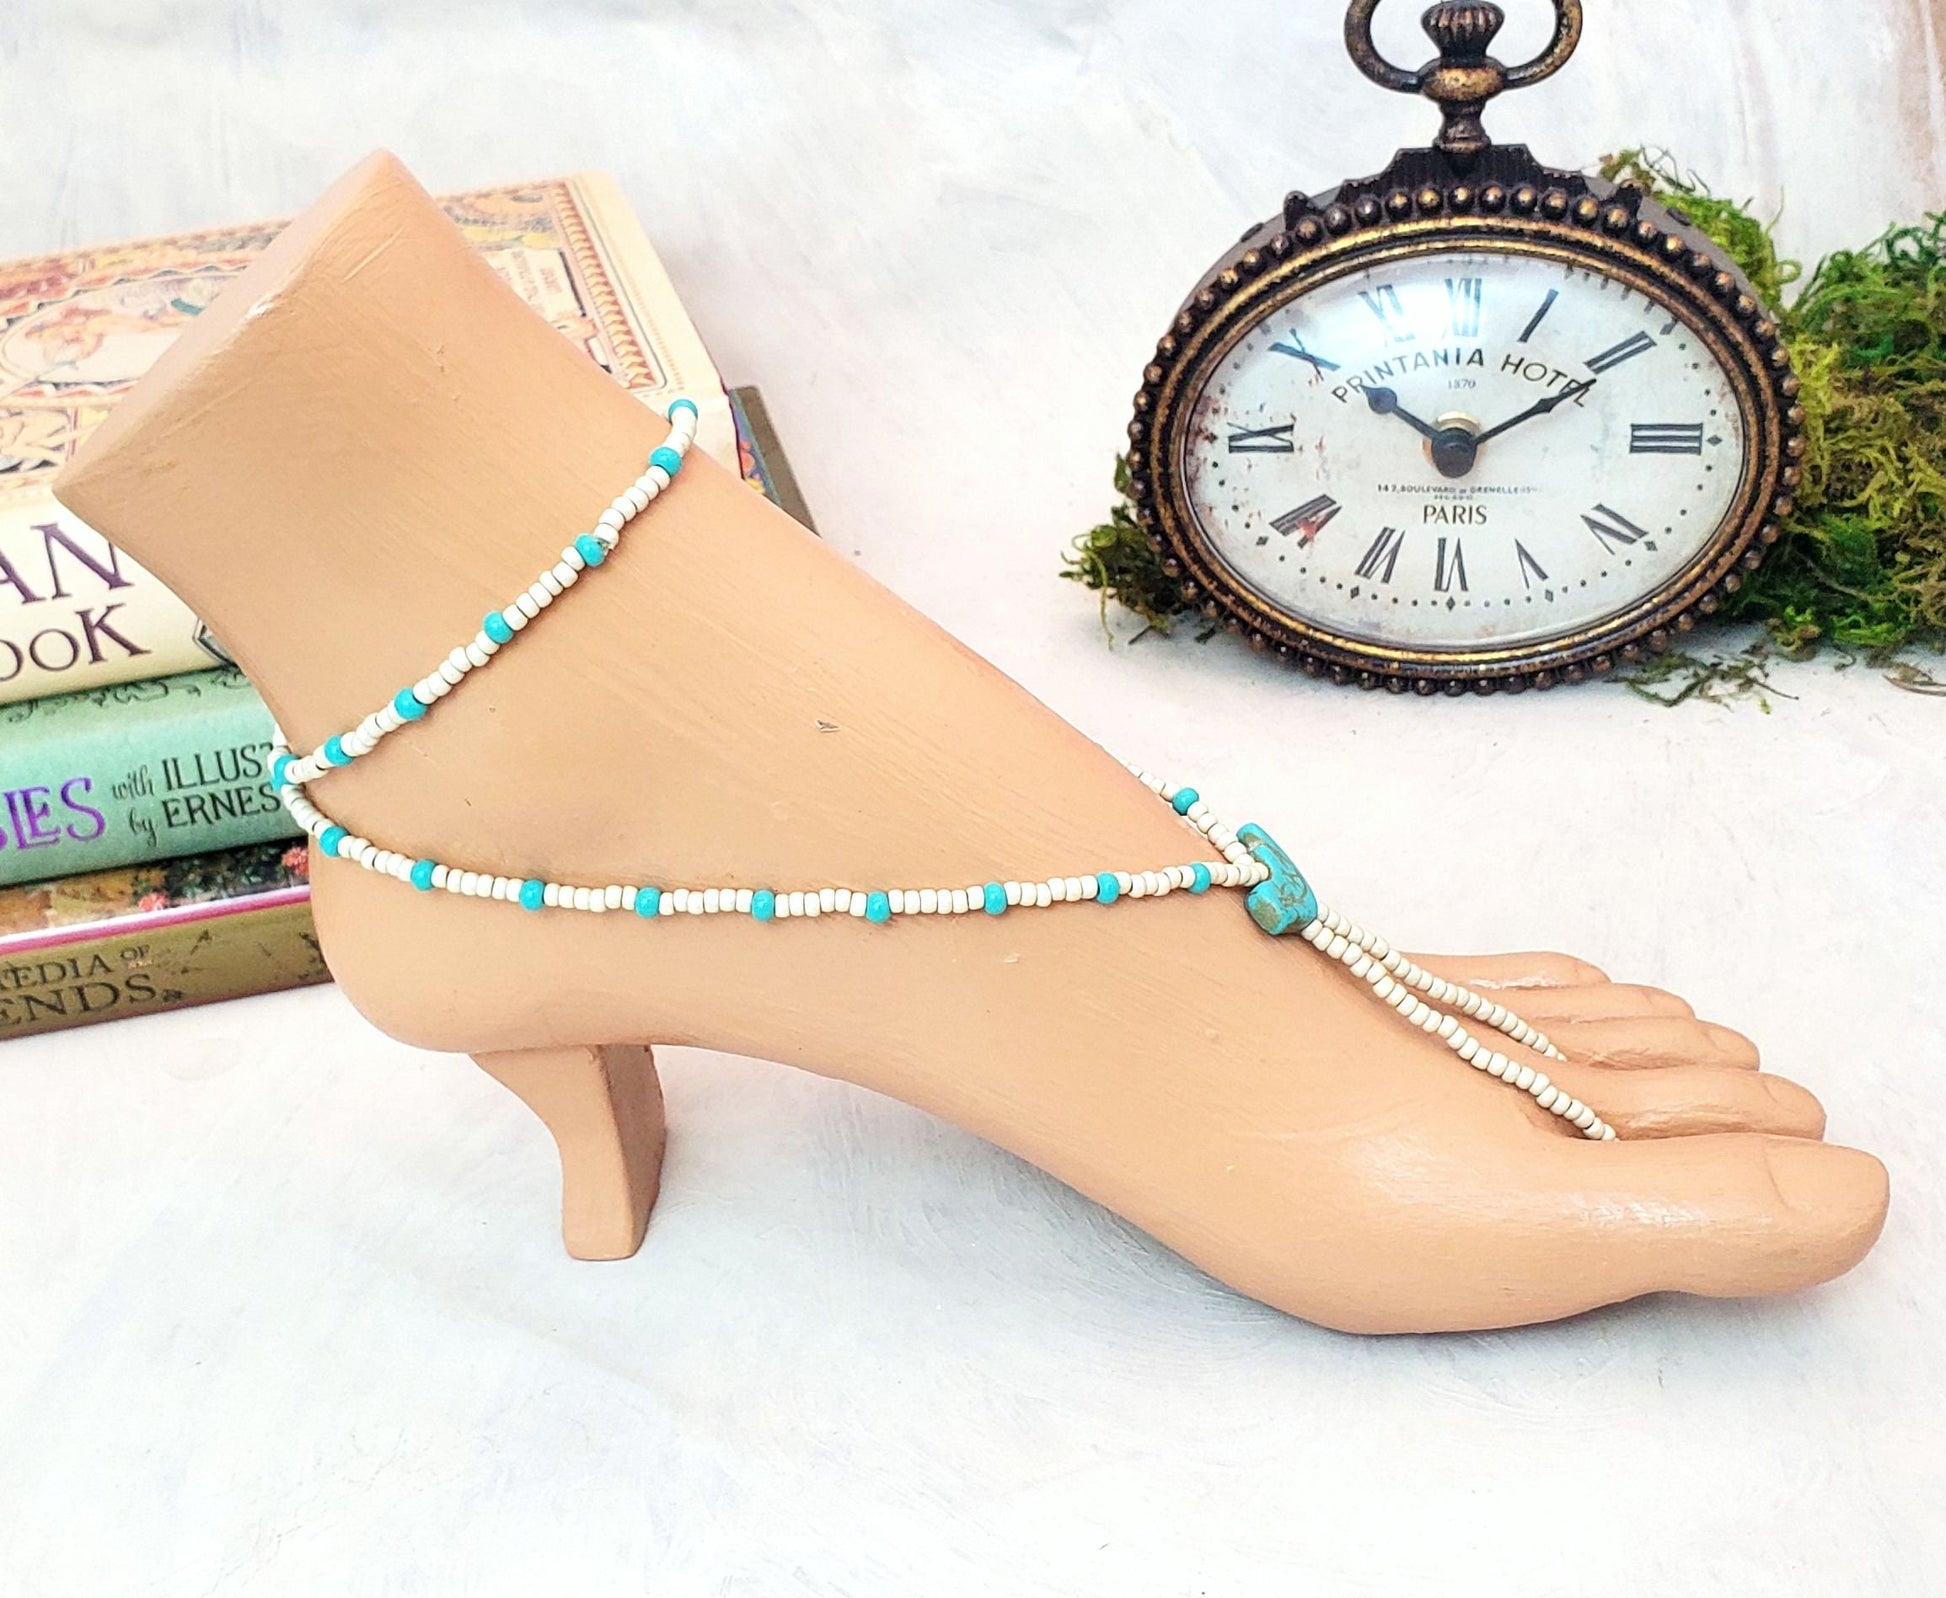 Elastic Beaded Barefoot Sandal or Hand Flower in Opaque White/Ivory + Turquoise Blue with Bird, Boho, Bohemian, Gypsy, Wedding, Bridesmaid